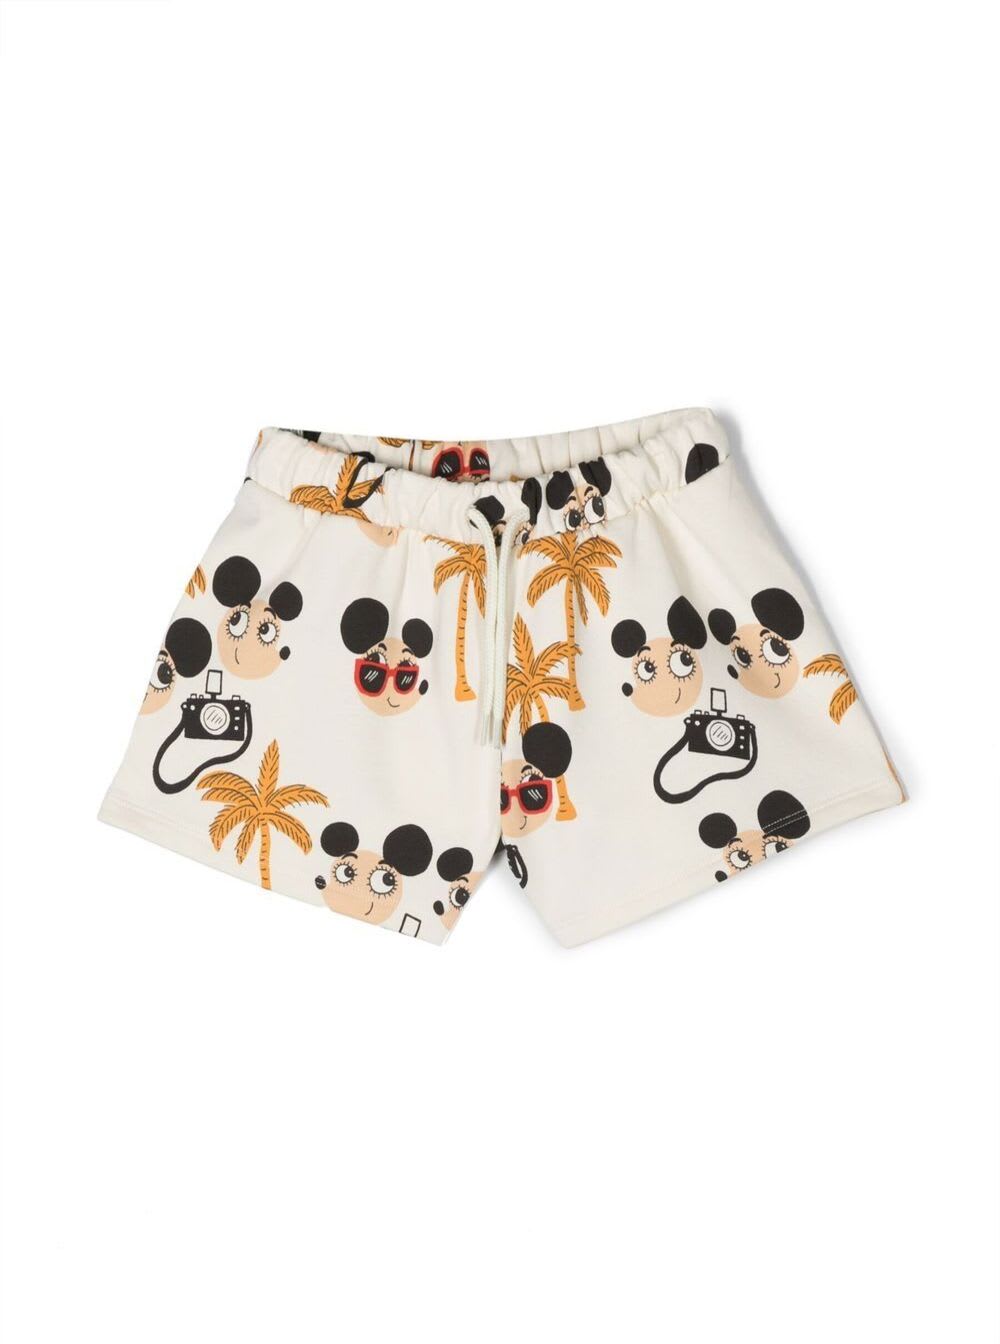 MINI RODINI WHITE DRAWSTRING SHORTS WITH ALL-OVER MICE AND PALMS PRINT IN COTTON GIRL